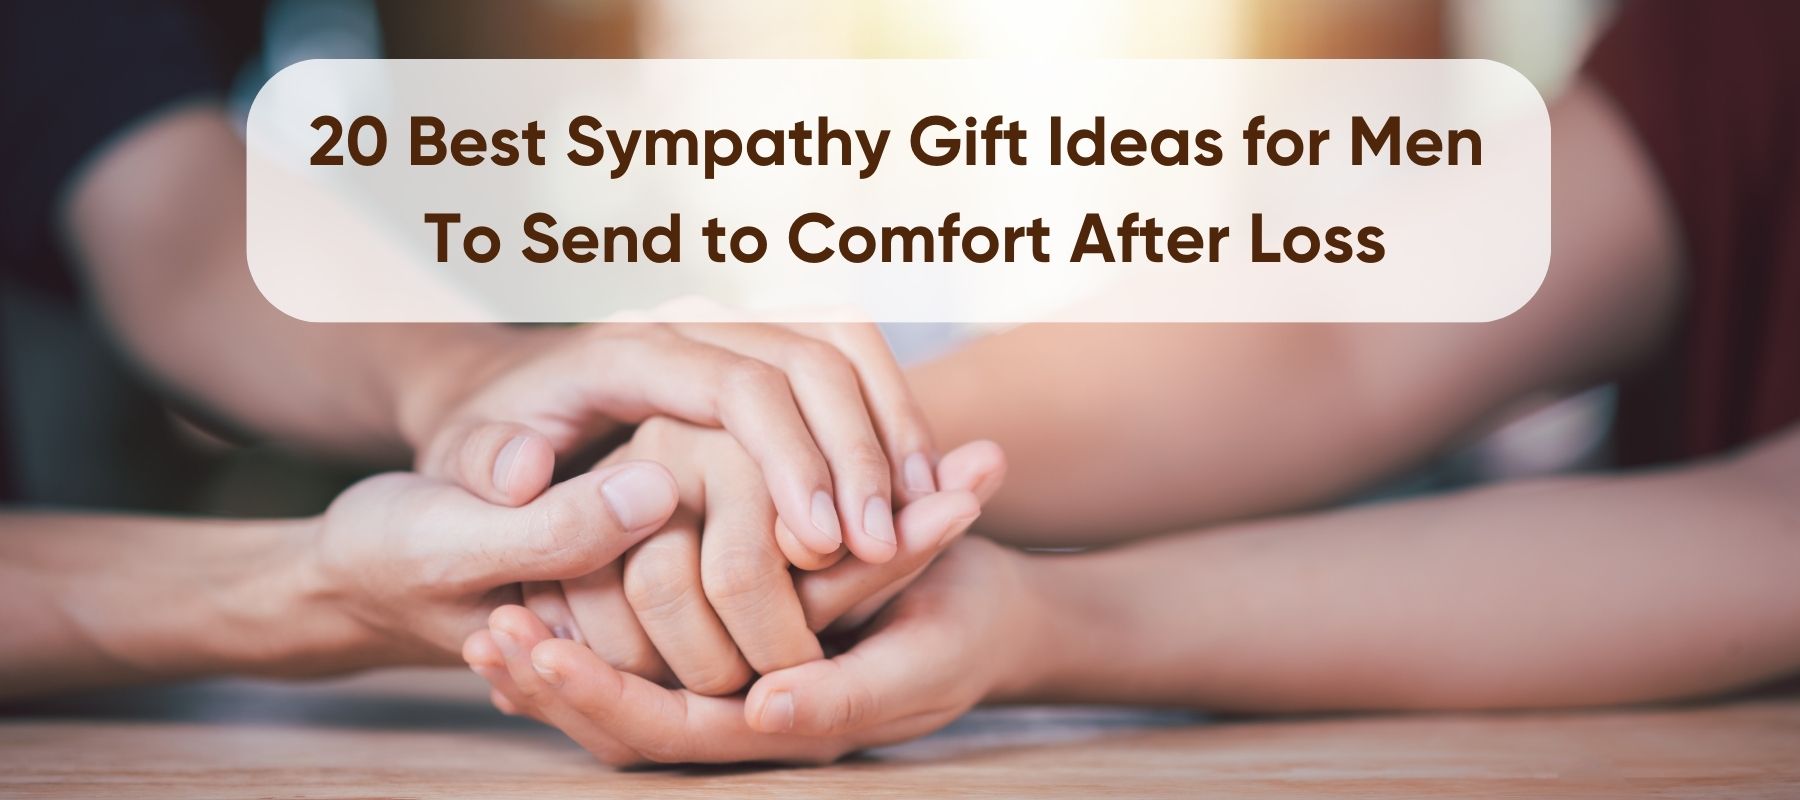 20 Best Sympathy Gifts for Men To Send to Comfort After Loss